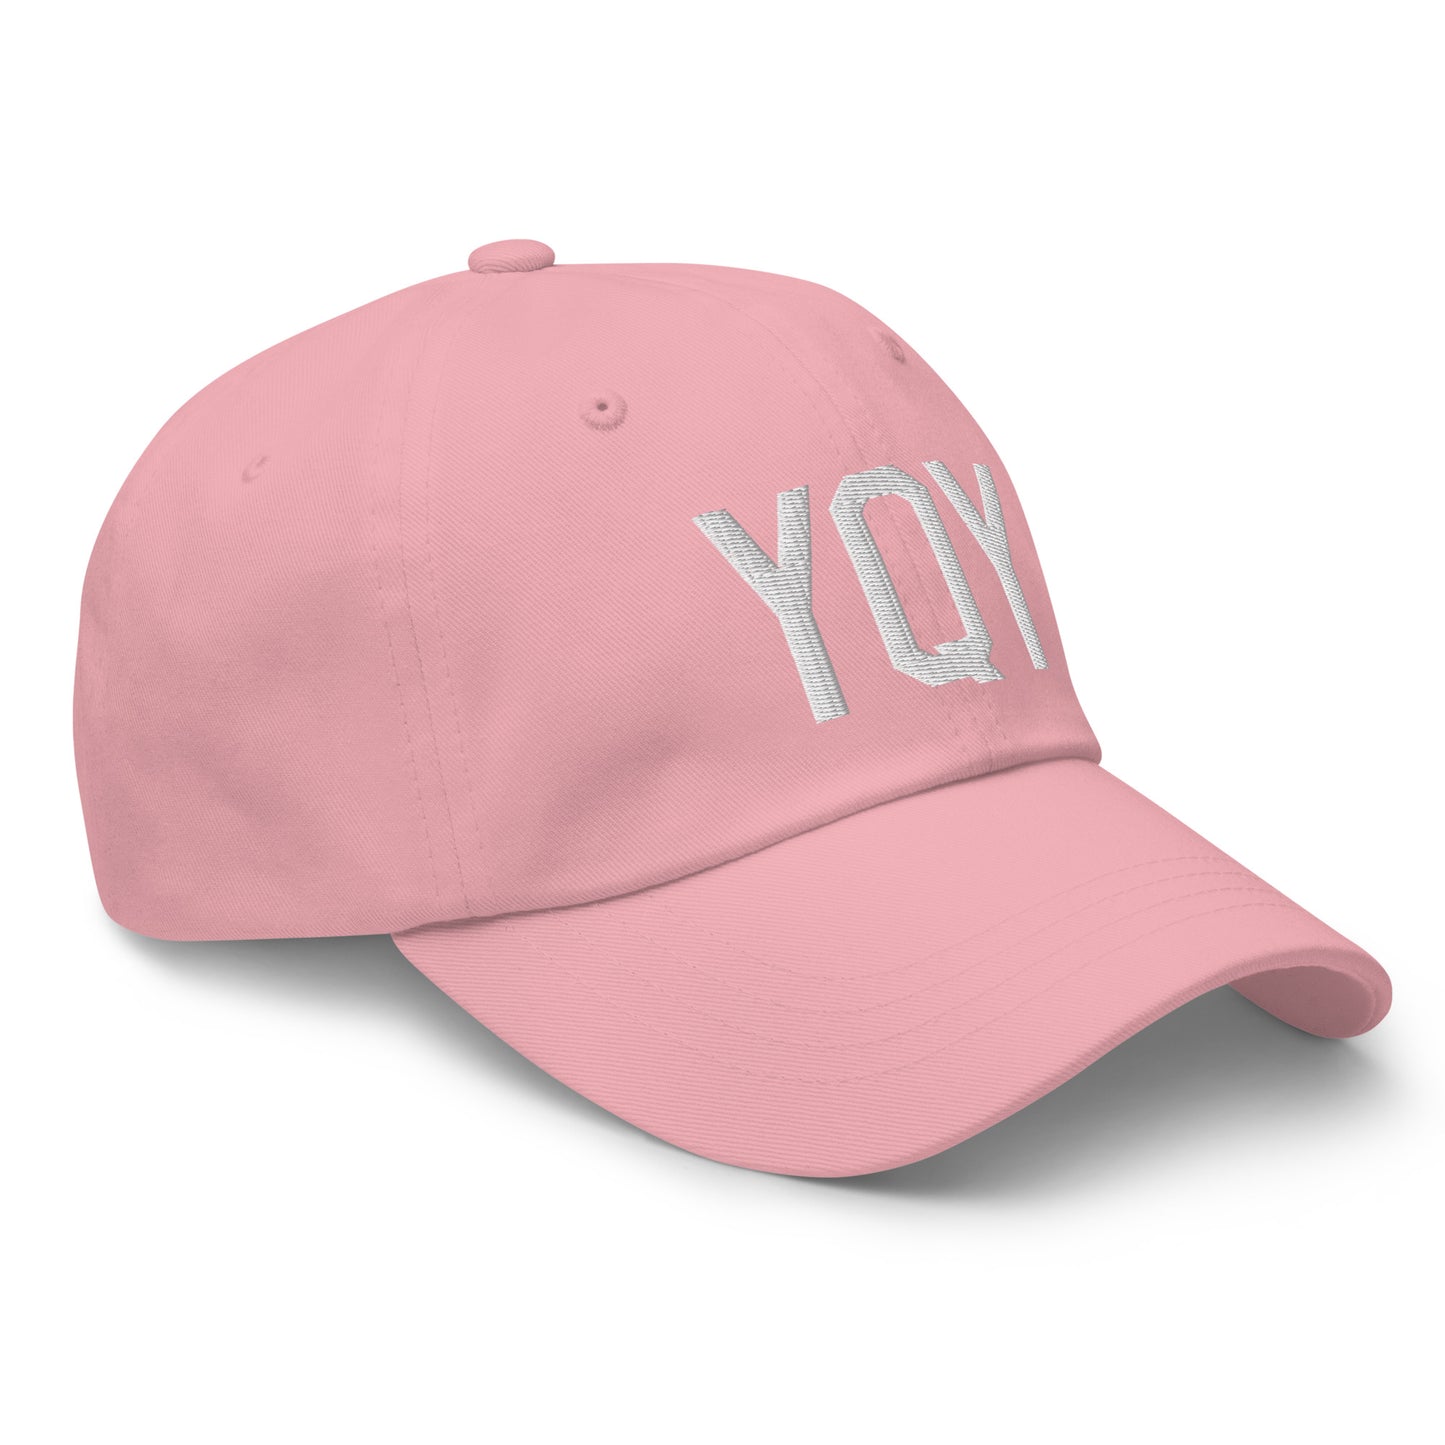 Airport Code Baseball Cap - White • YQY Sydney • YHM Designs - Image 26